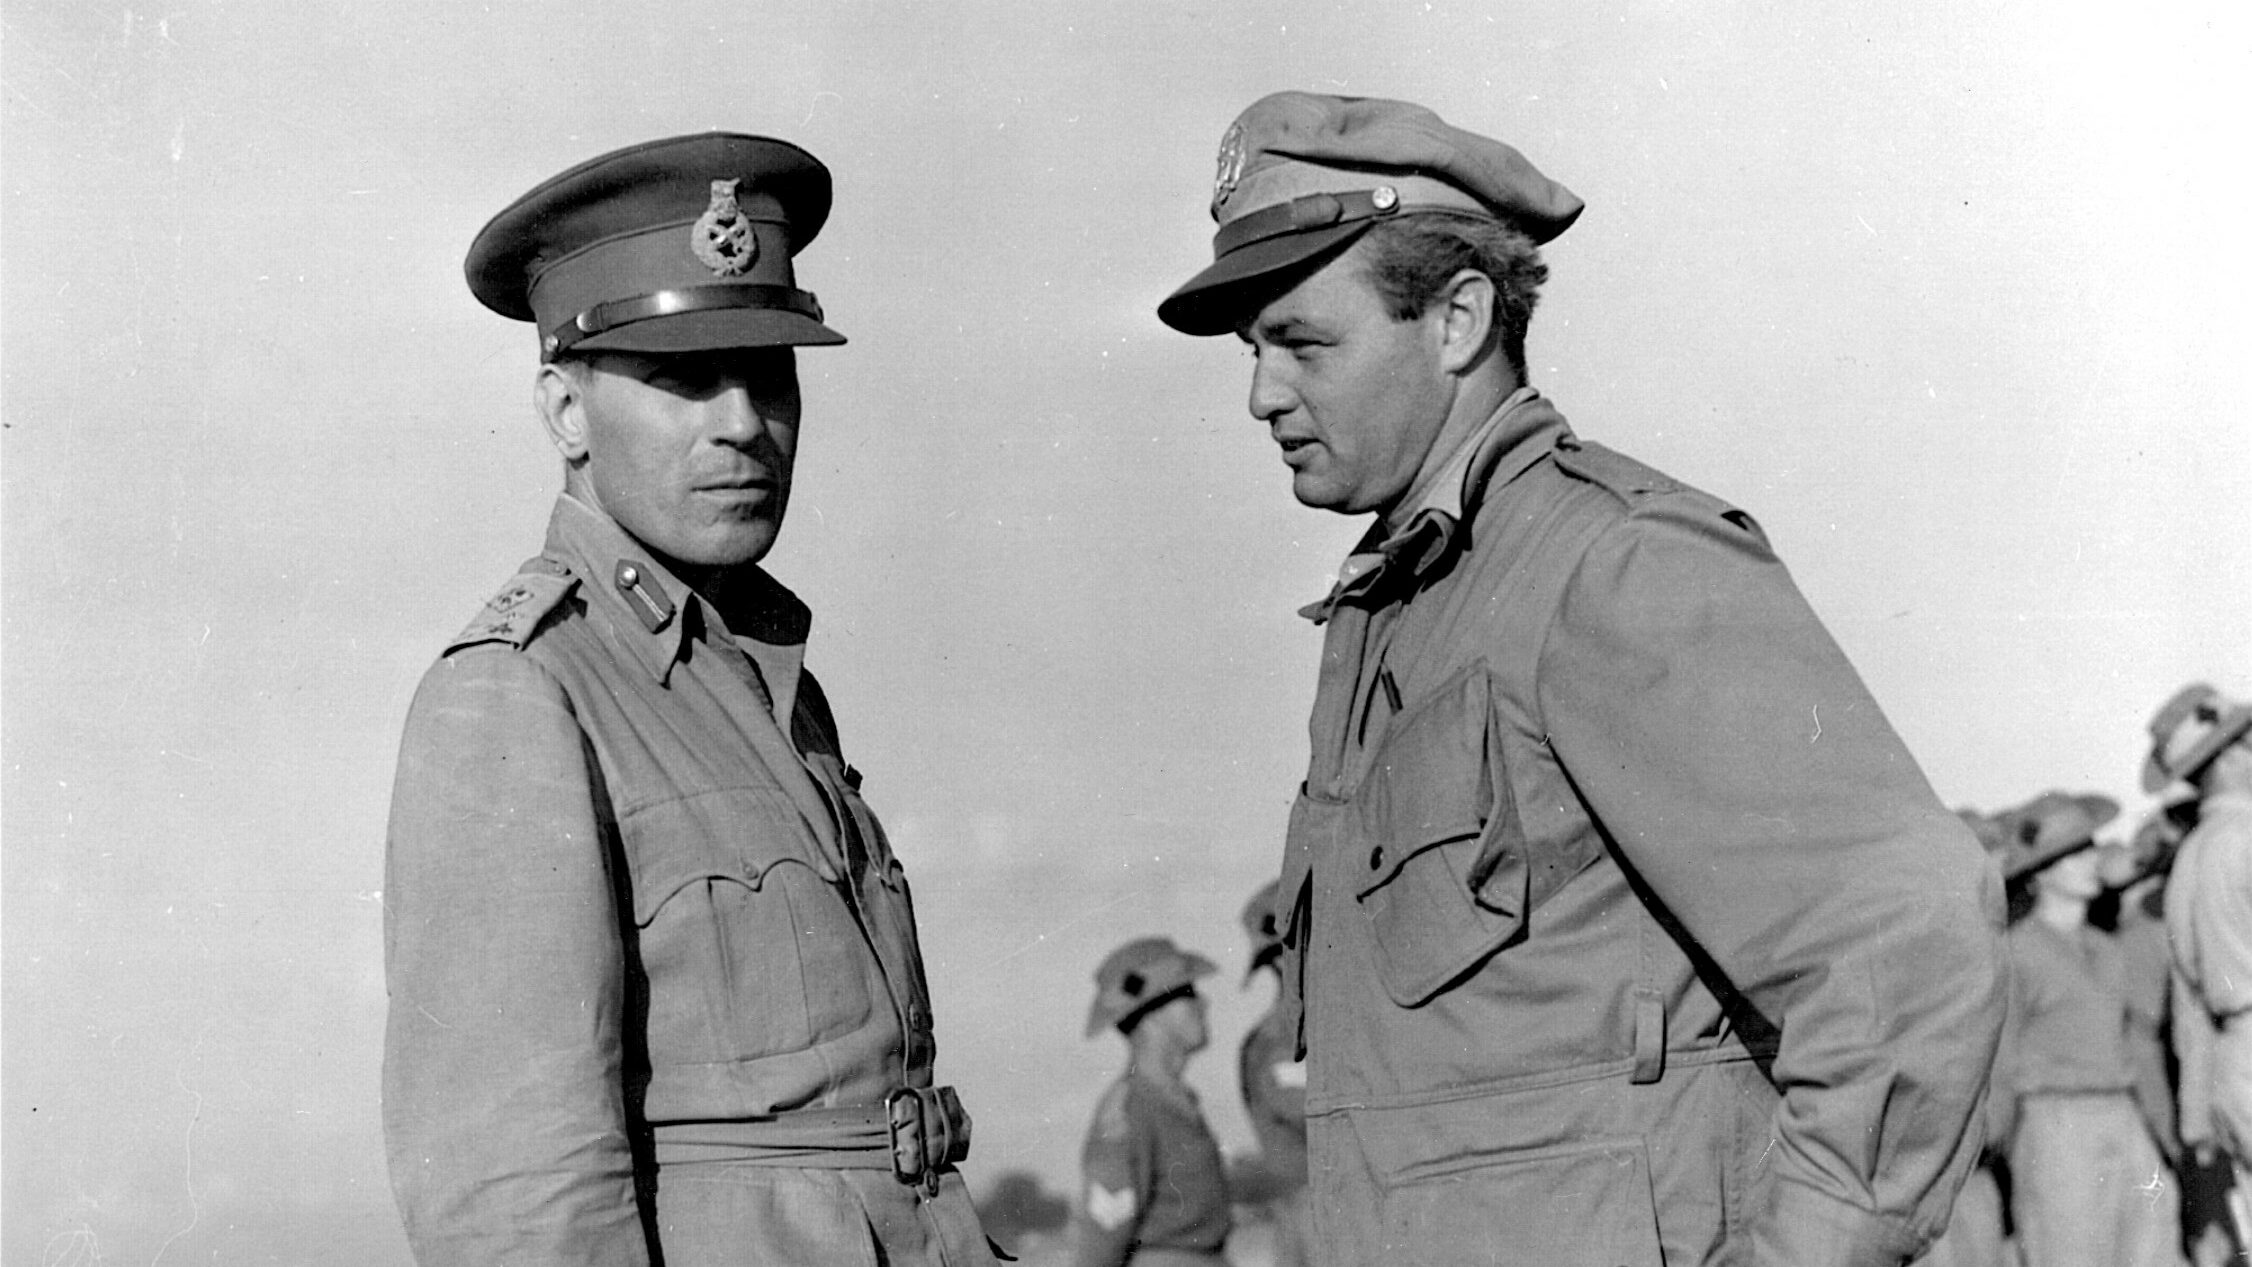 Wingate confers with U.S. Major Philip Cochran in India in December 1943. Cochran was a key commander during the effort to insert and supply Wingate’s Chindits behind Japanese lines. (National Archives)